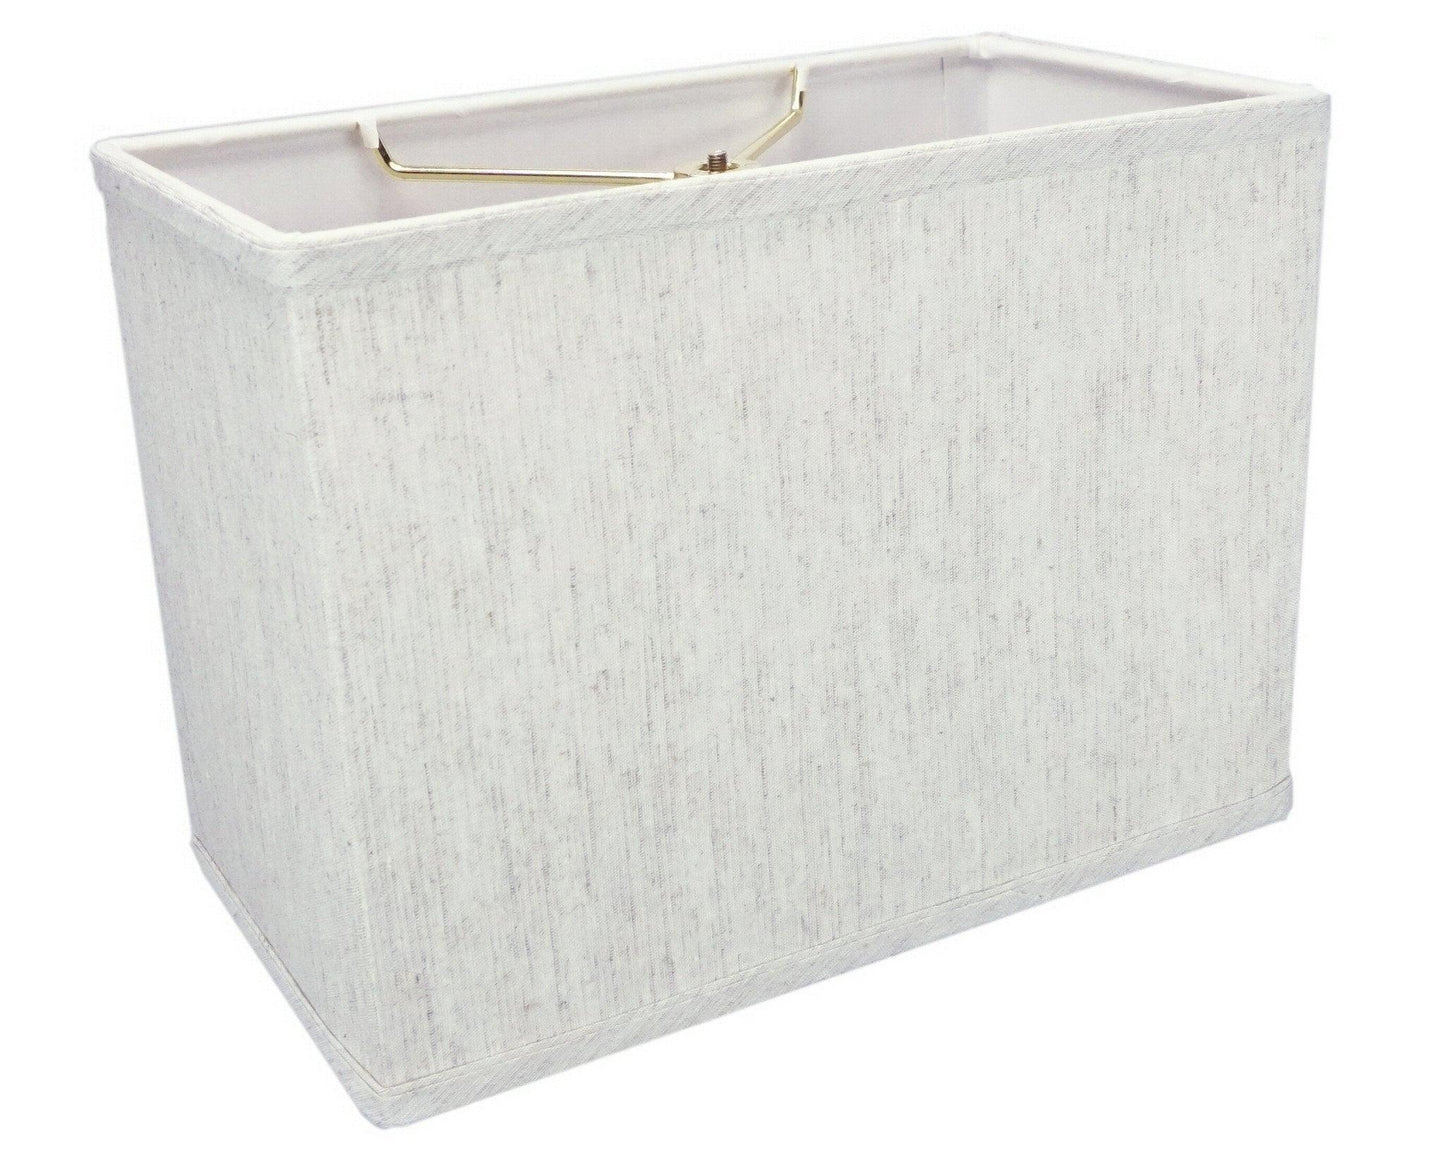 7"W x 9"H Rectangular Drum Lampshade Softback Textured Oatmeal - Specialty Shades